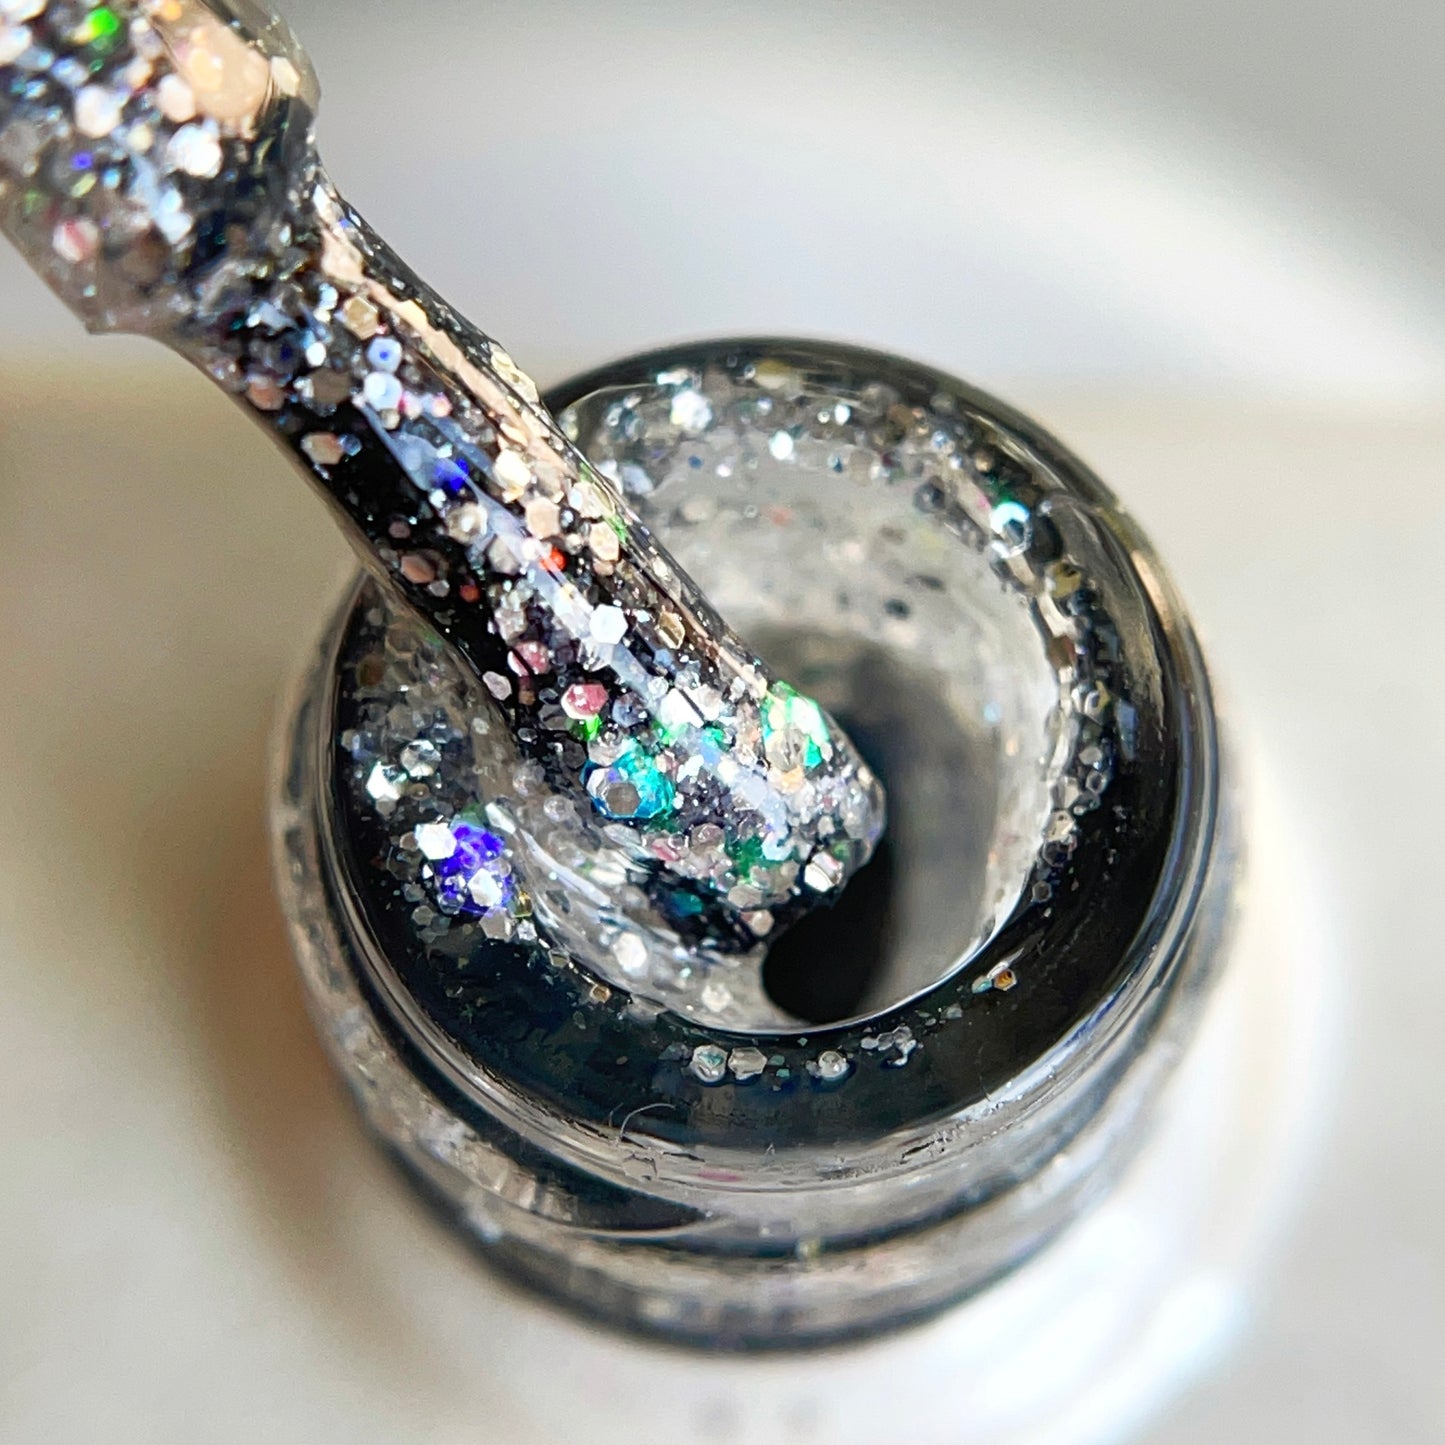 THINK OF NAIL TGP40 from 3 GLITTER COLLECTION (8ml)